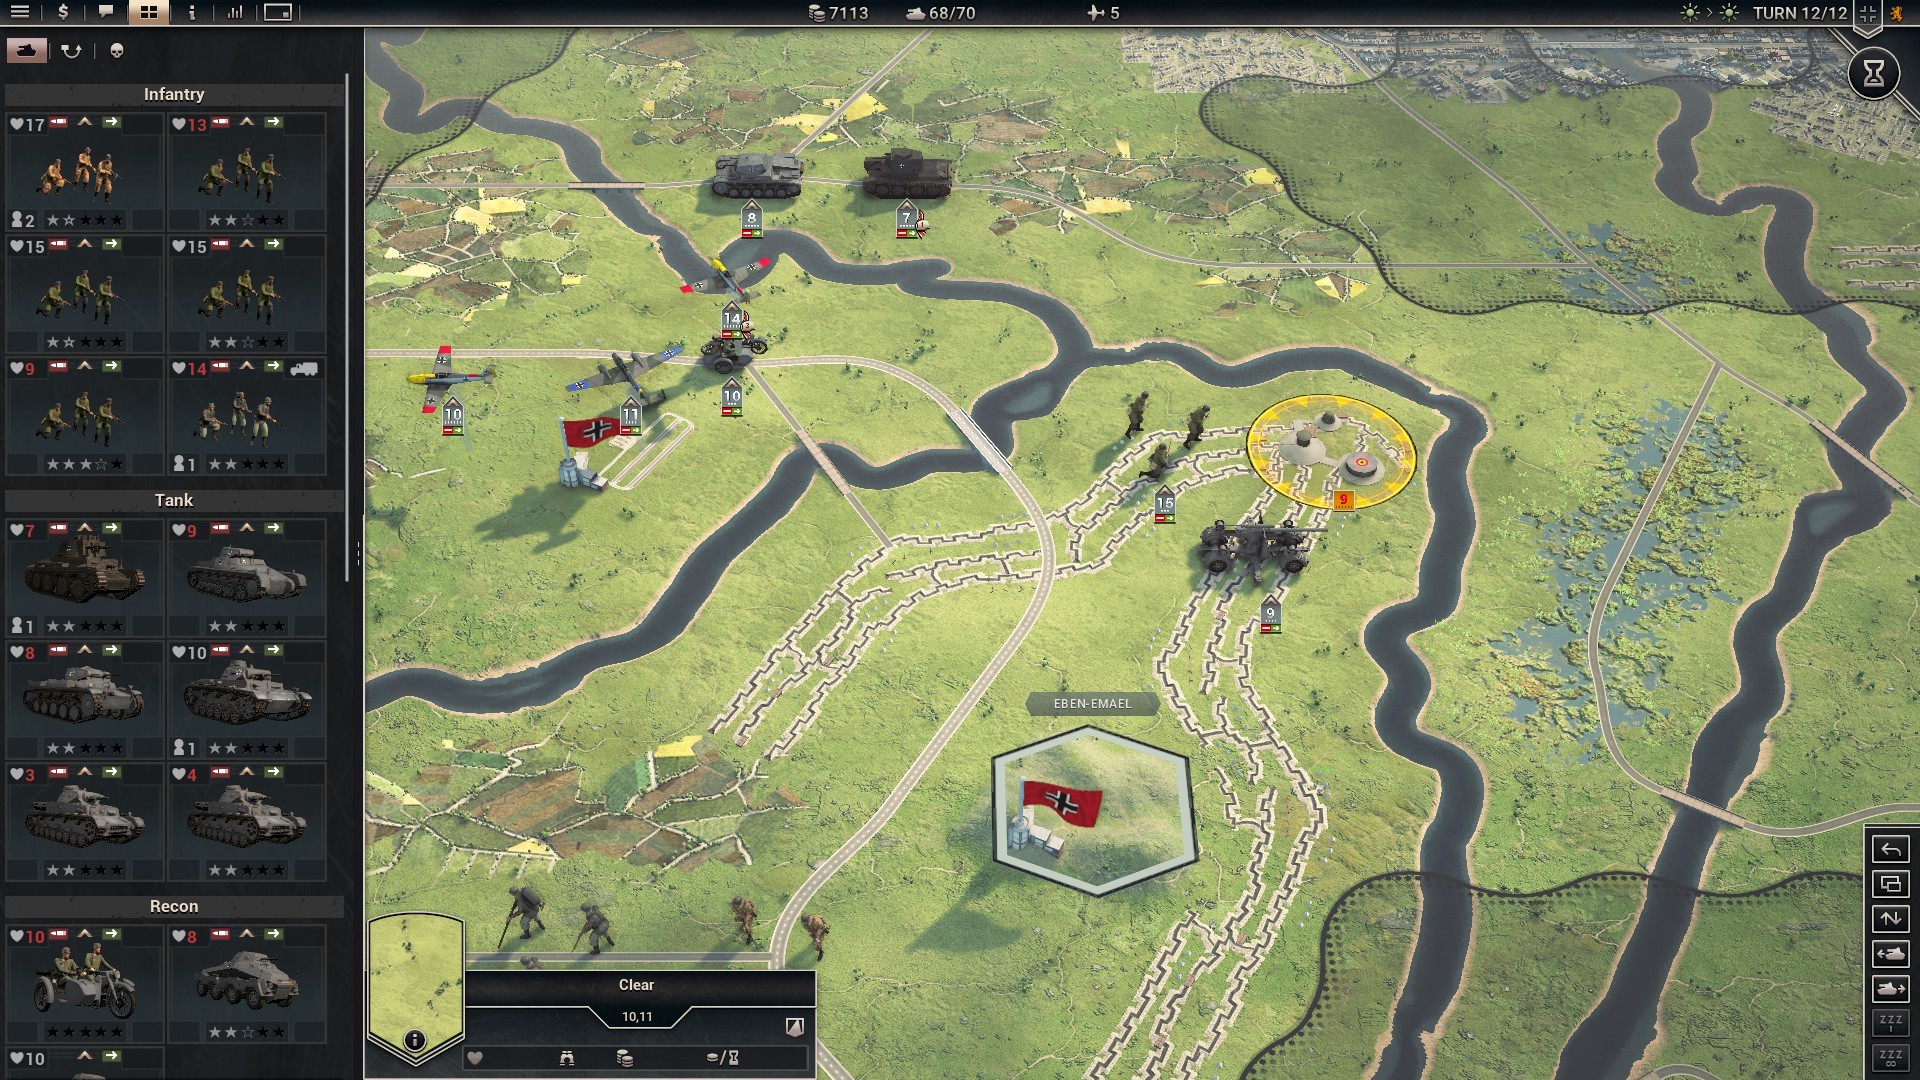 Panzer Corps 2: Axis Operations - 1940 DLC Steam CD Key